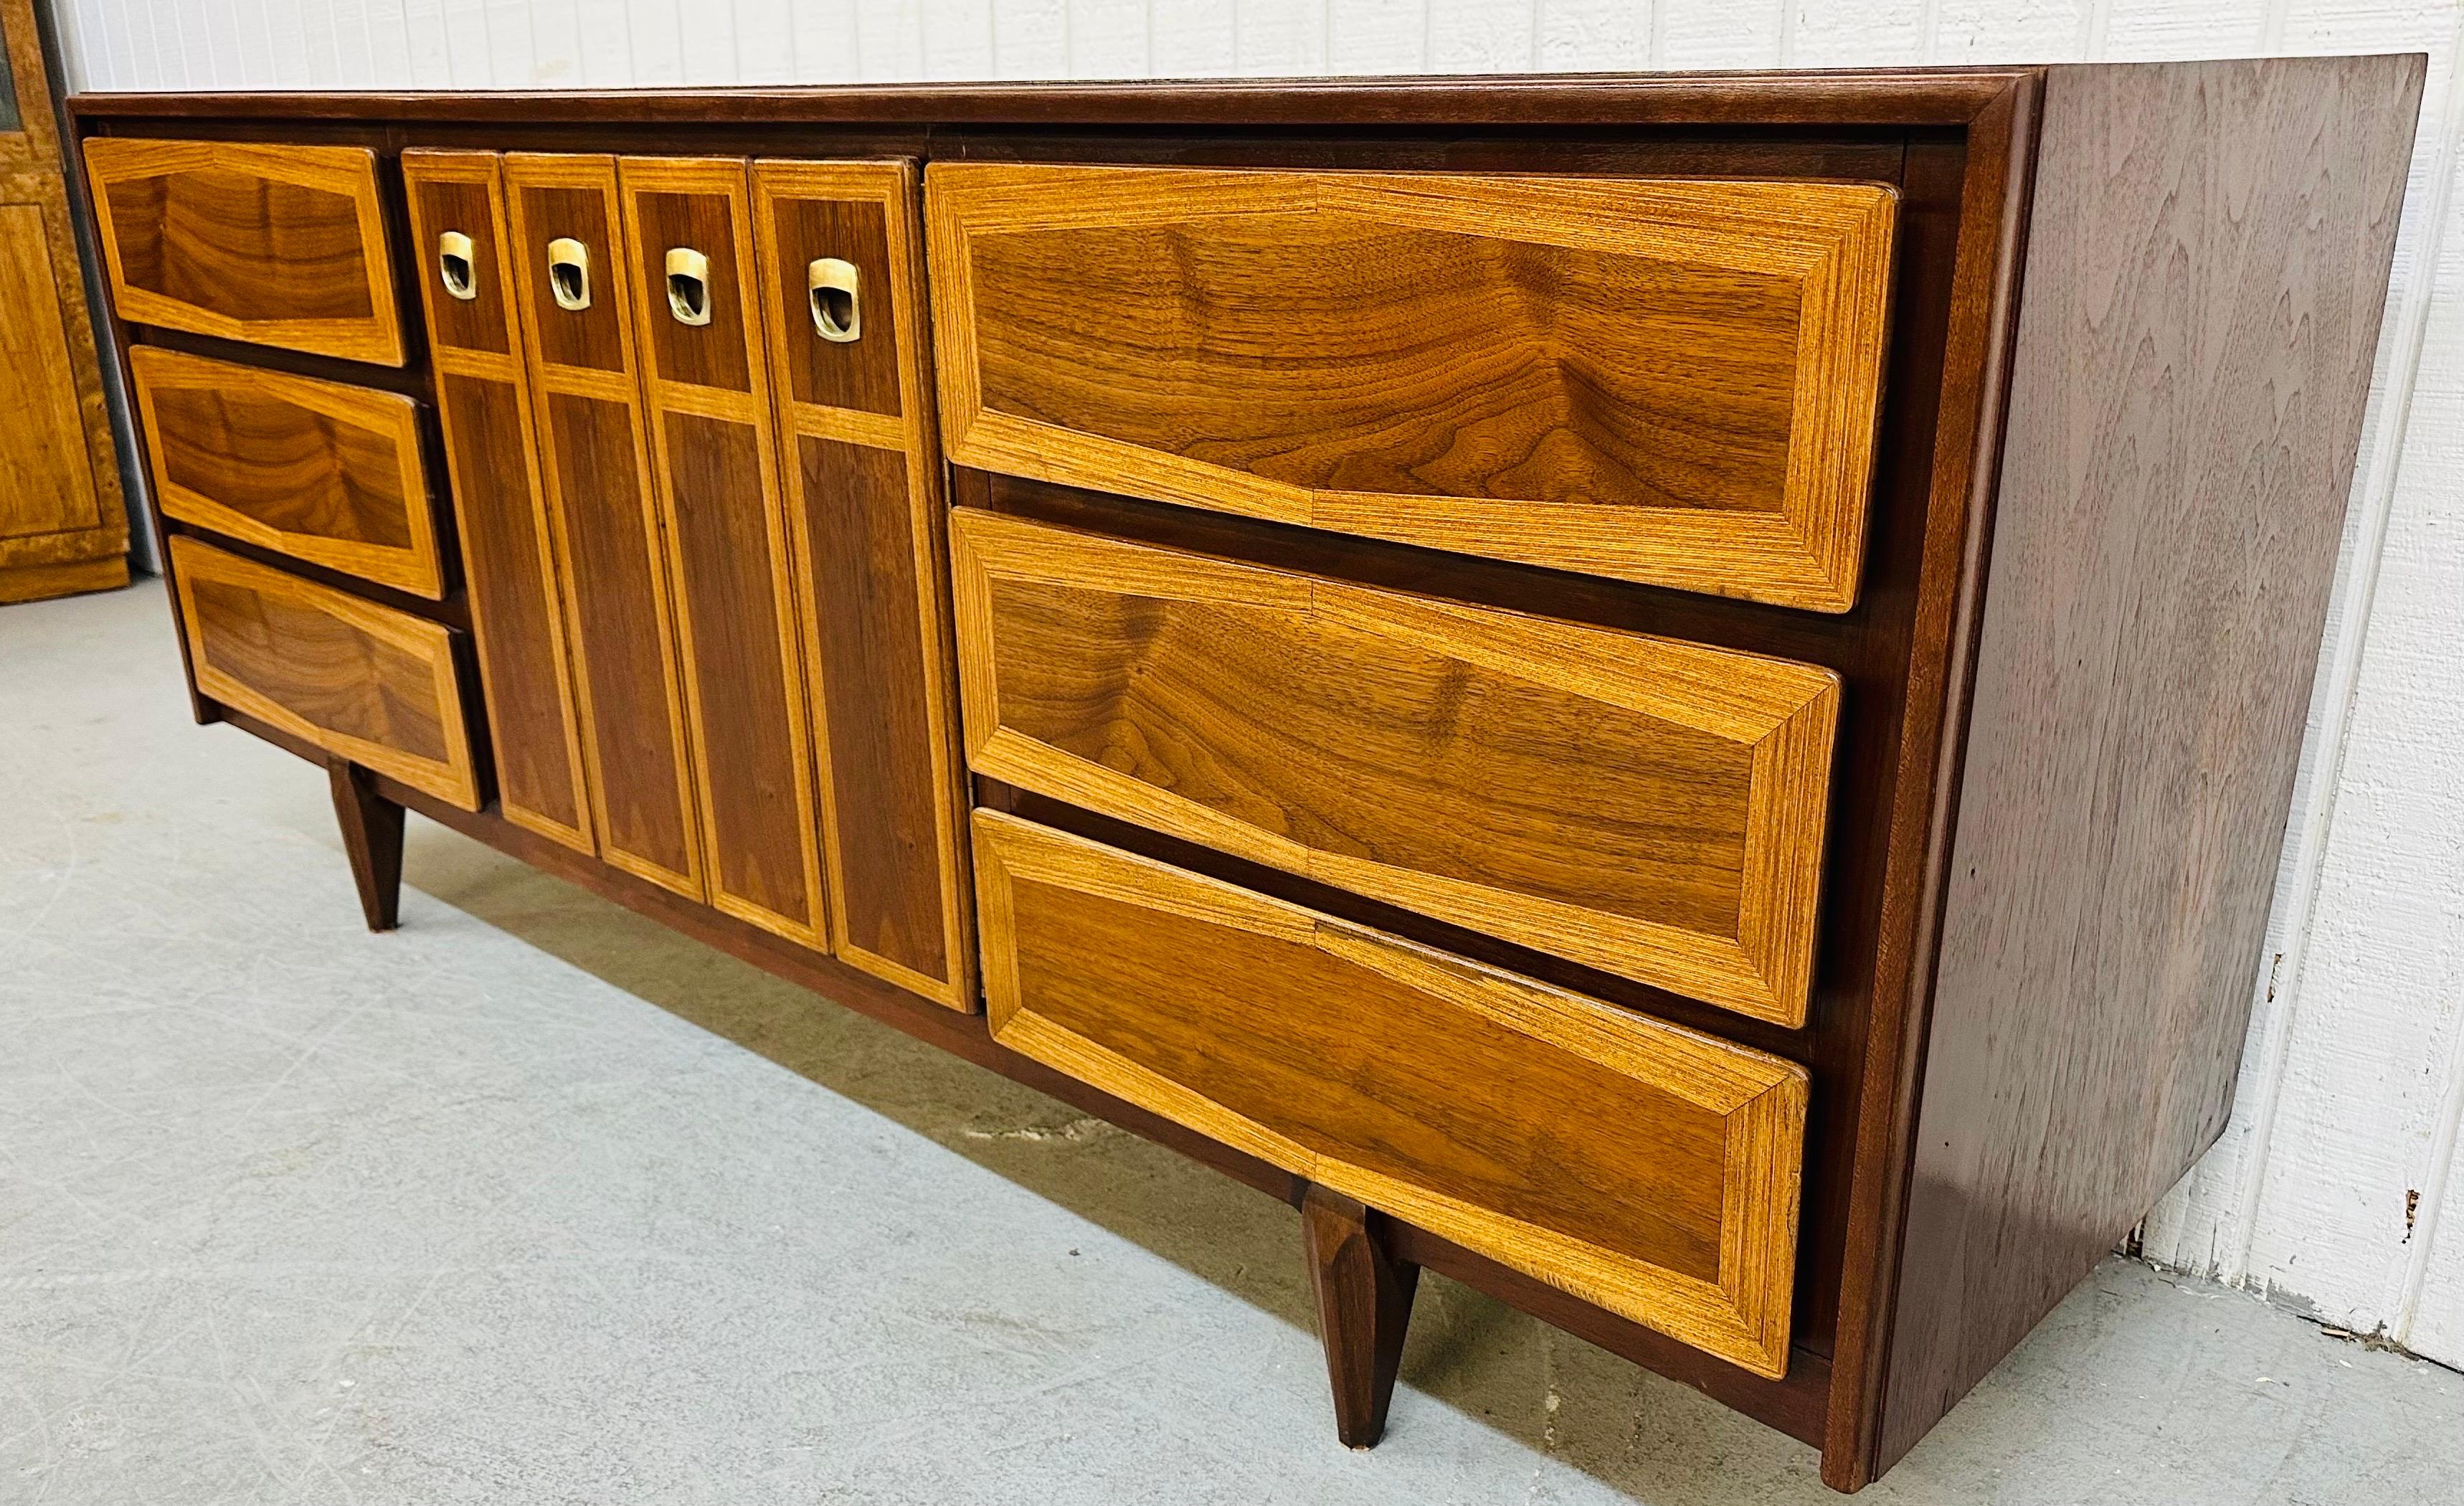 This listing is for a Mid-Century Modern American of Martinsville Walnut Dresser. Featuring six large drawers, center doors that open up to three hidden drawers, original hardware, and a beautiful two-tone walnut finish. This is an exceptional